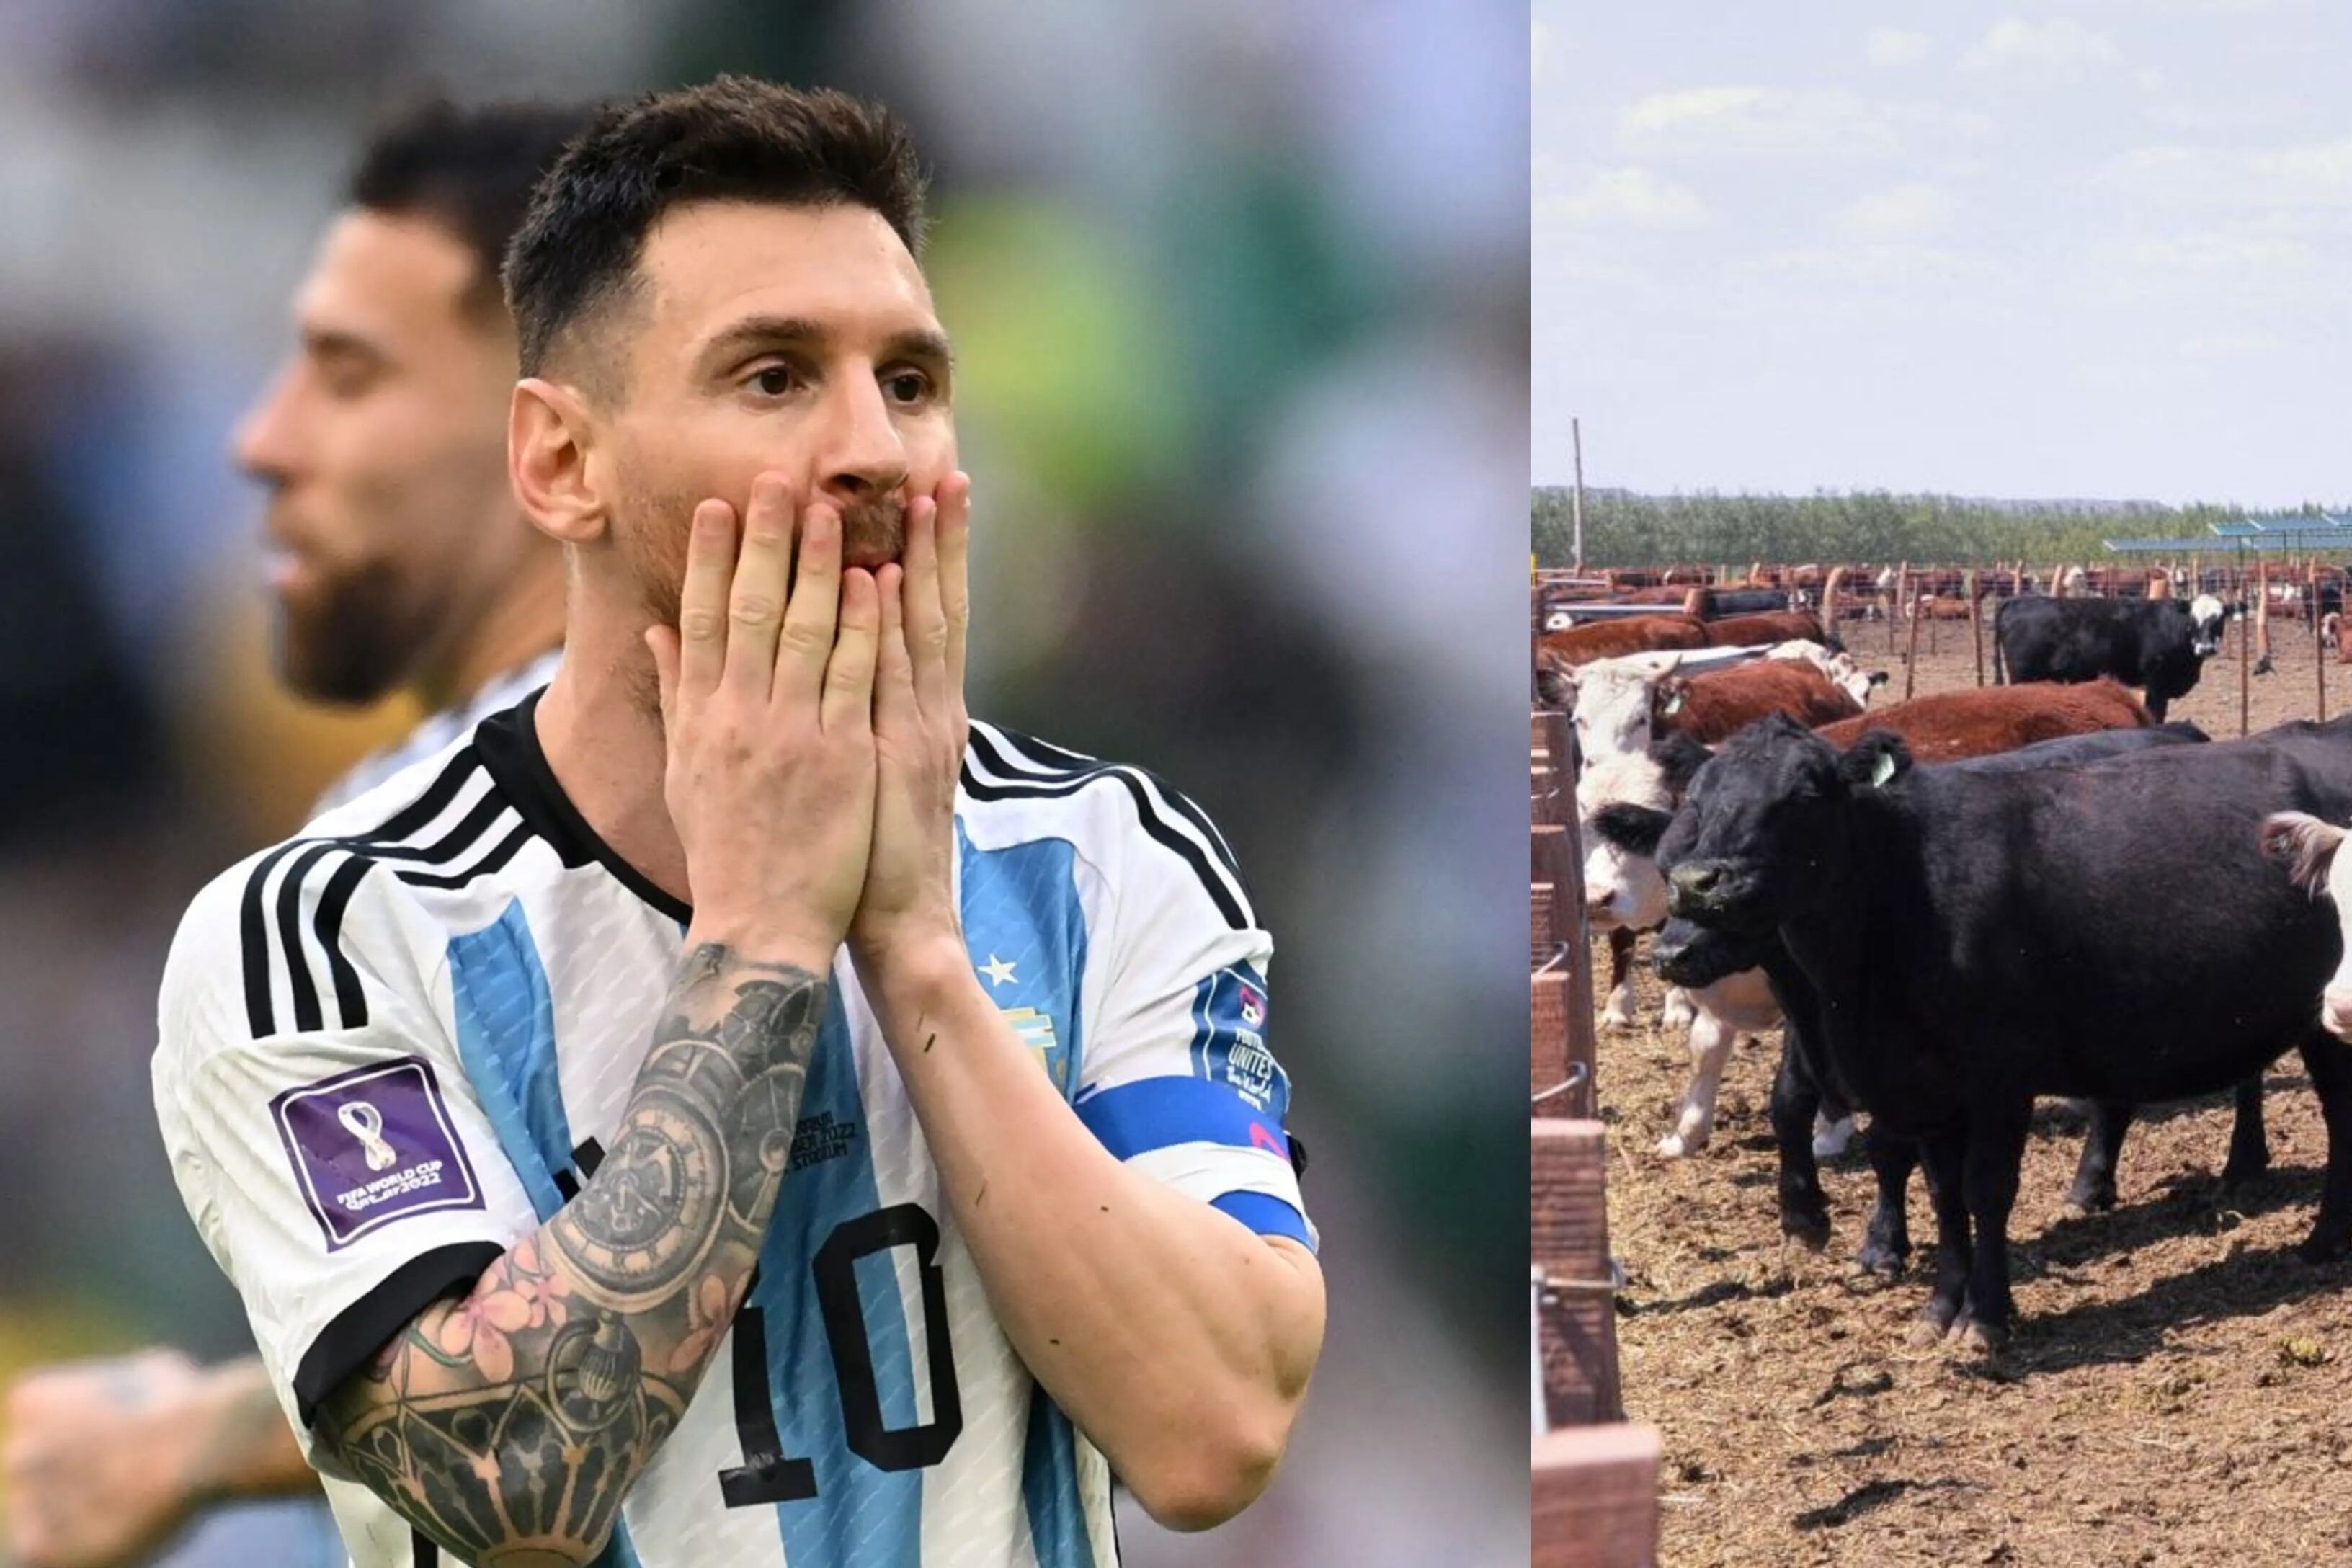 He was the best in the world and Messi's idol, now he raises cows and is looking for work